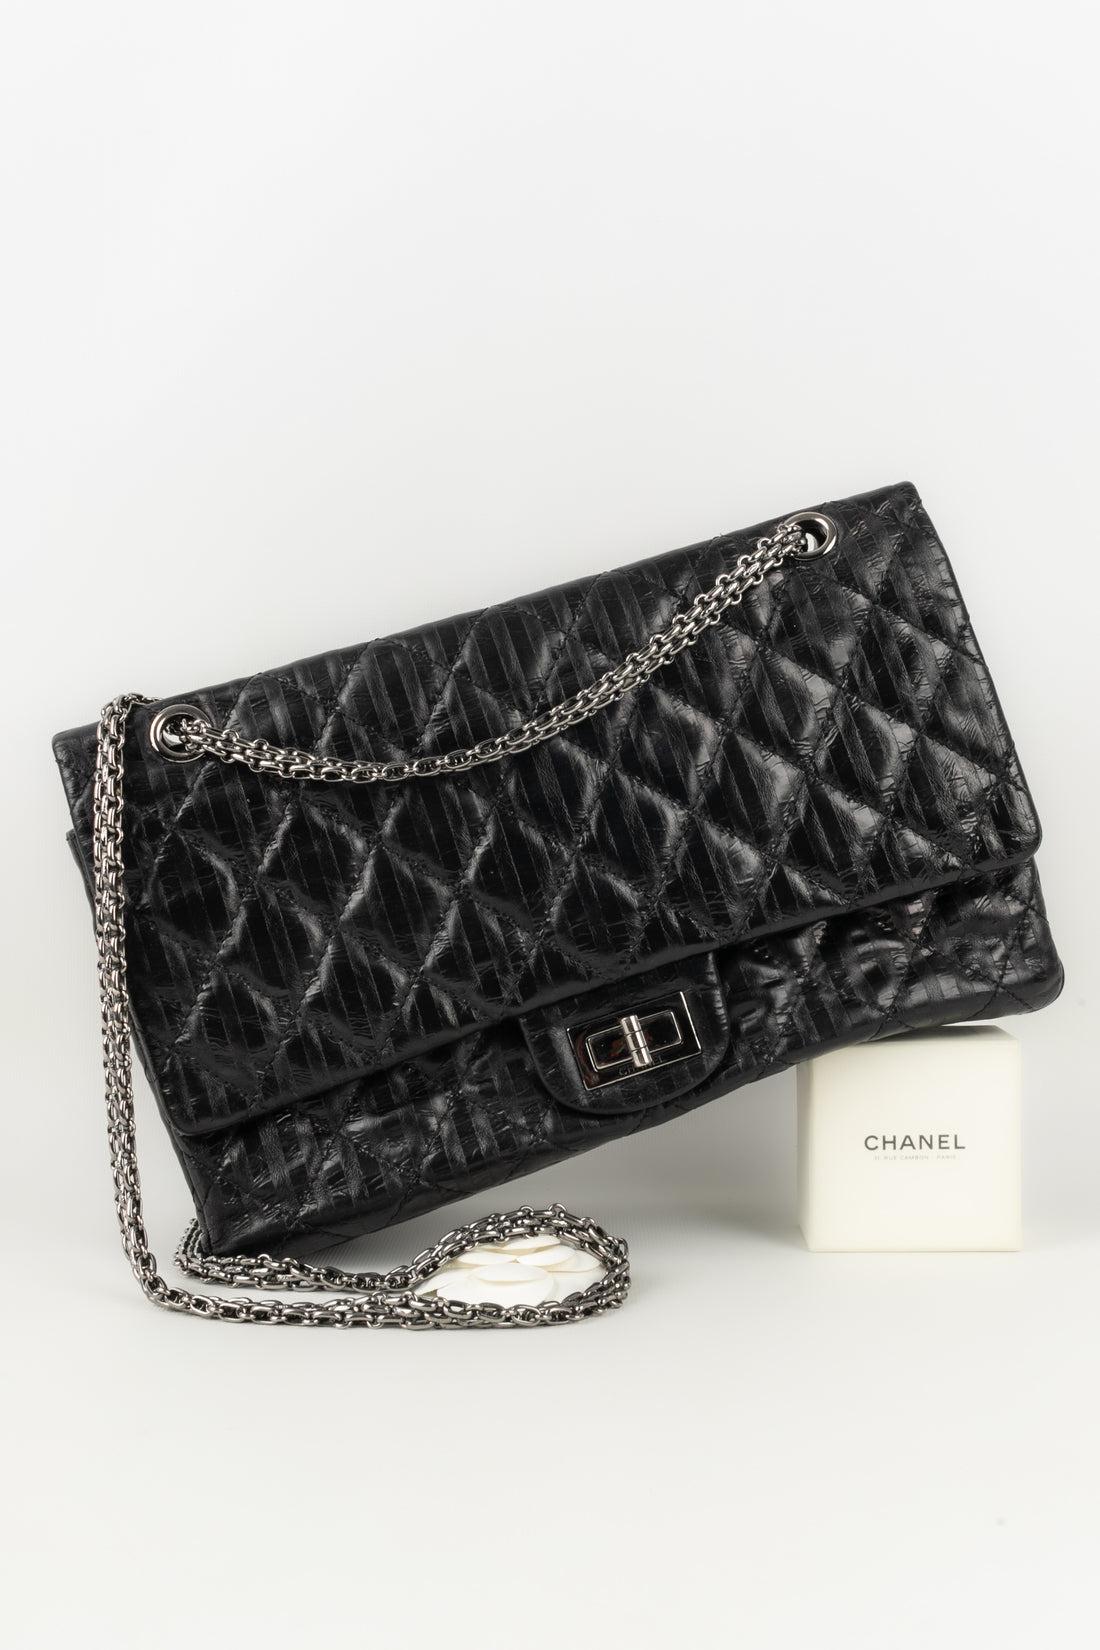 Chanel - (Made in France) Black leather bag with silvery metal elements and a serial number. 2008/2009 Collection.

Additional information:
Condition: Good condition
Dimensions: Length: 30 cm - Height: 20 cm - Depth: 9 cm - Handle length: 105